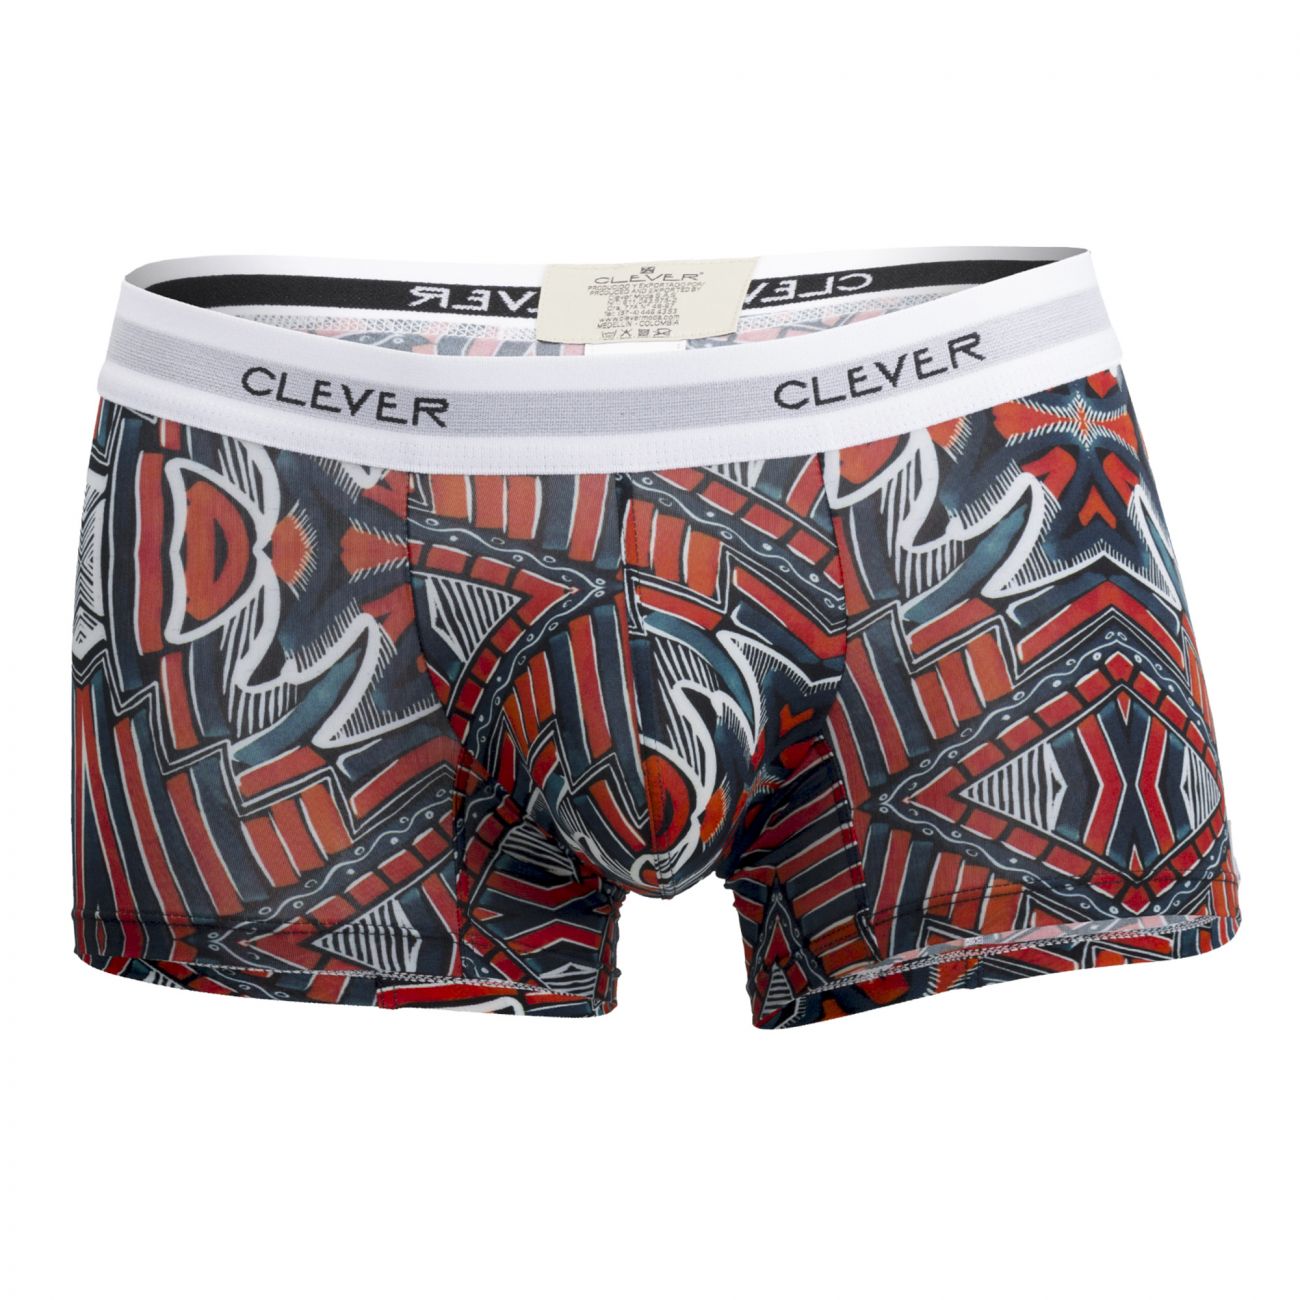 Clever 2390 Refined Boxer Briefs Red Multi